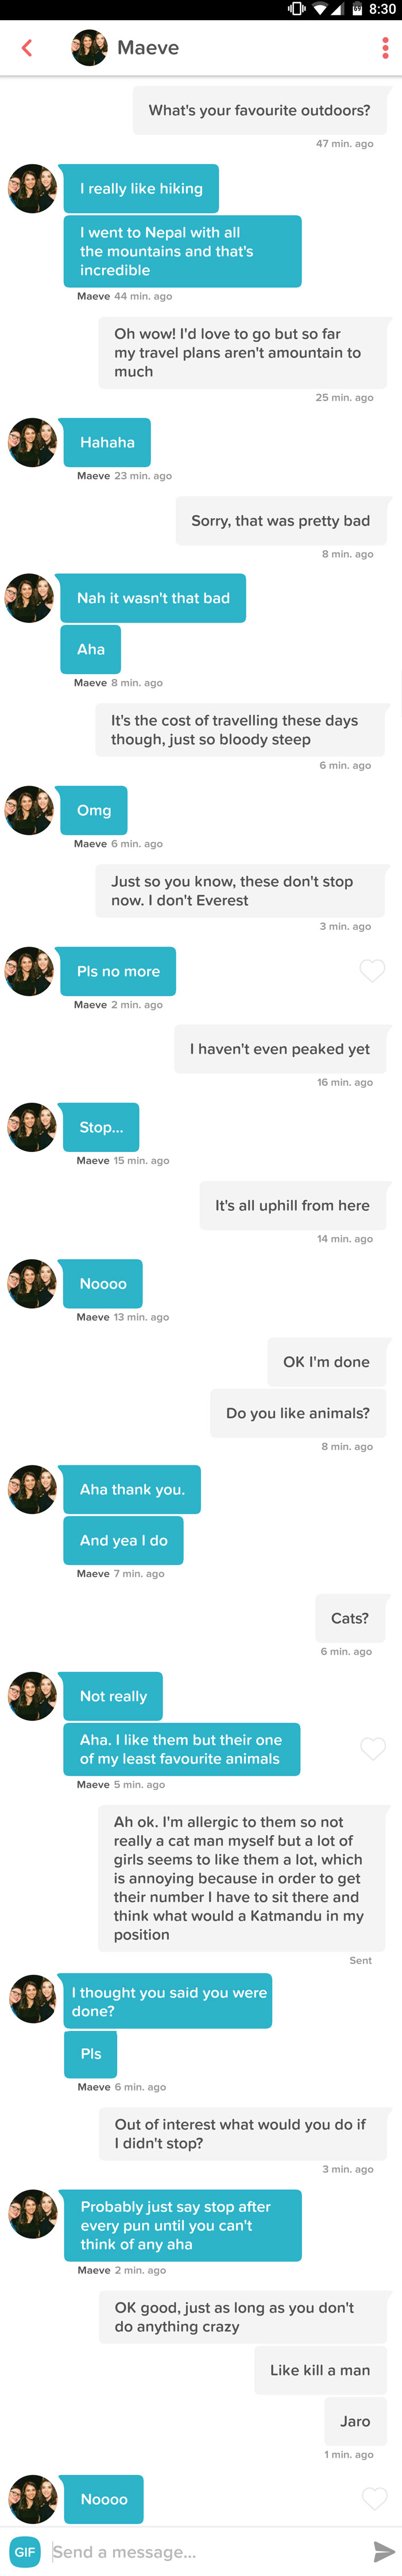 Tinder Can Be A Slippery Slope